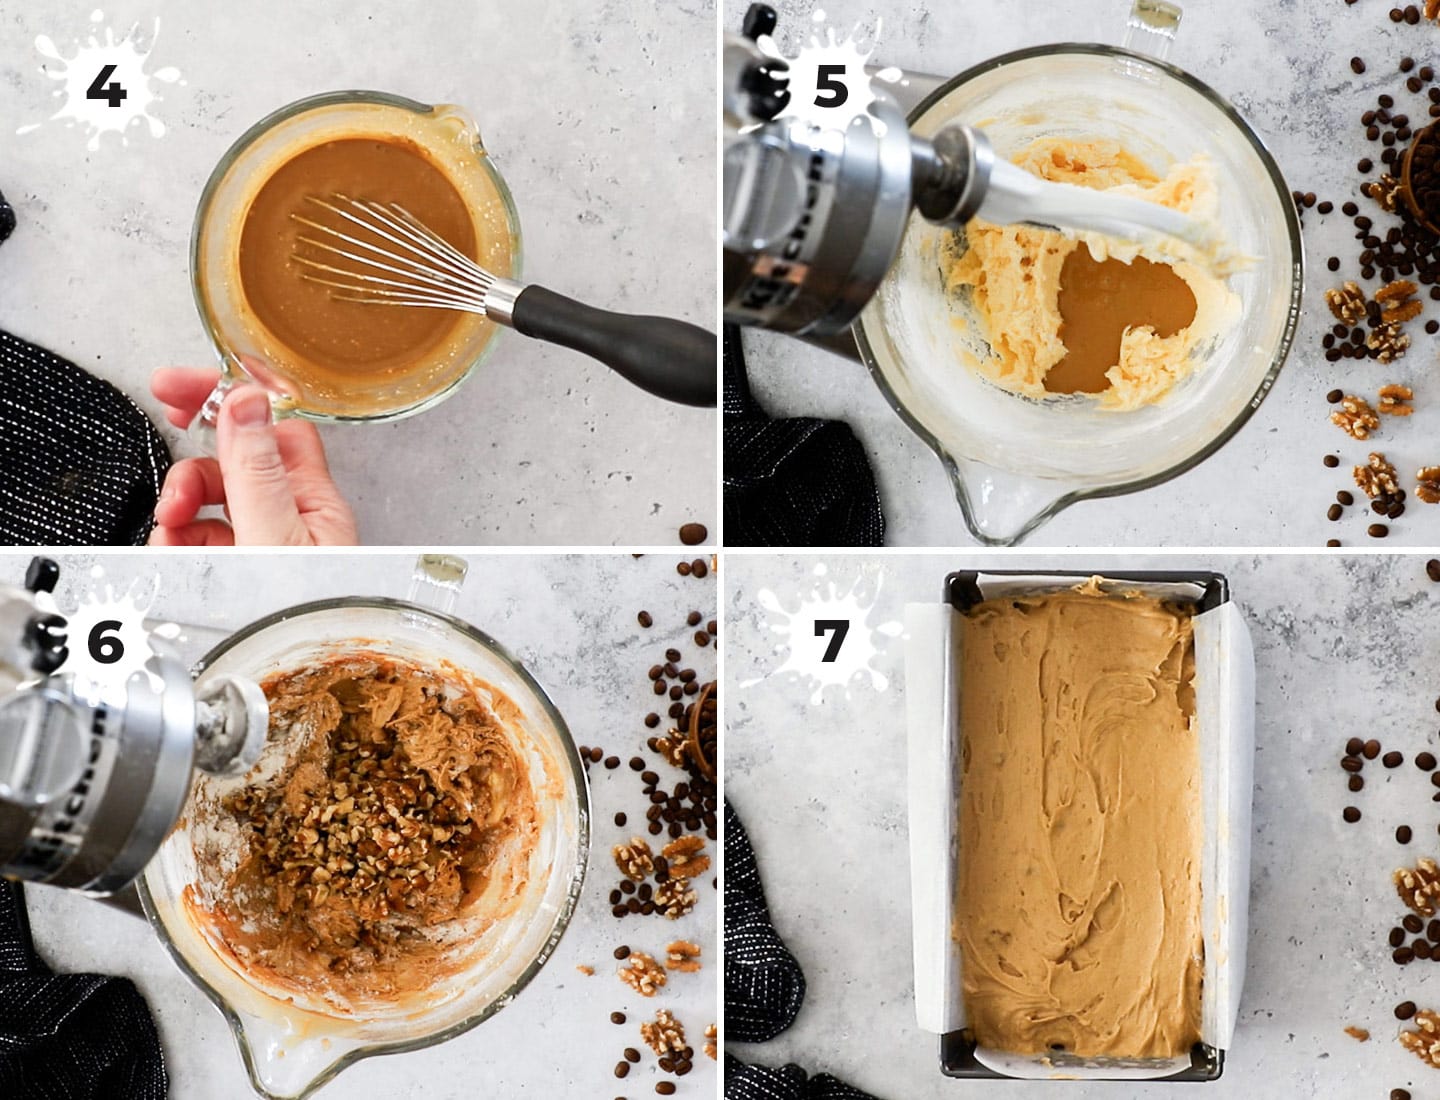 A collage showing how to make the cake batter.